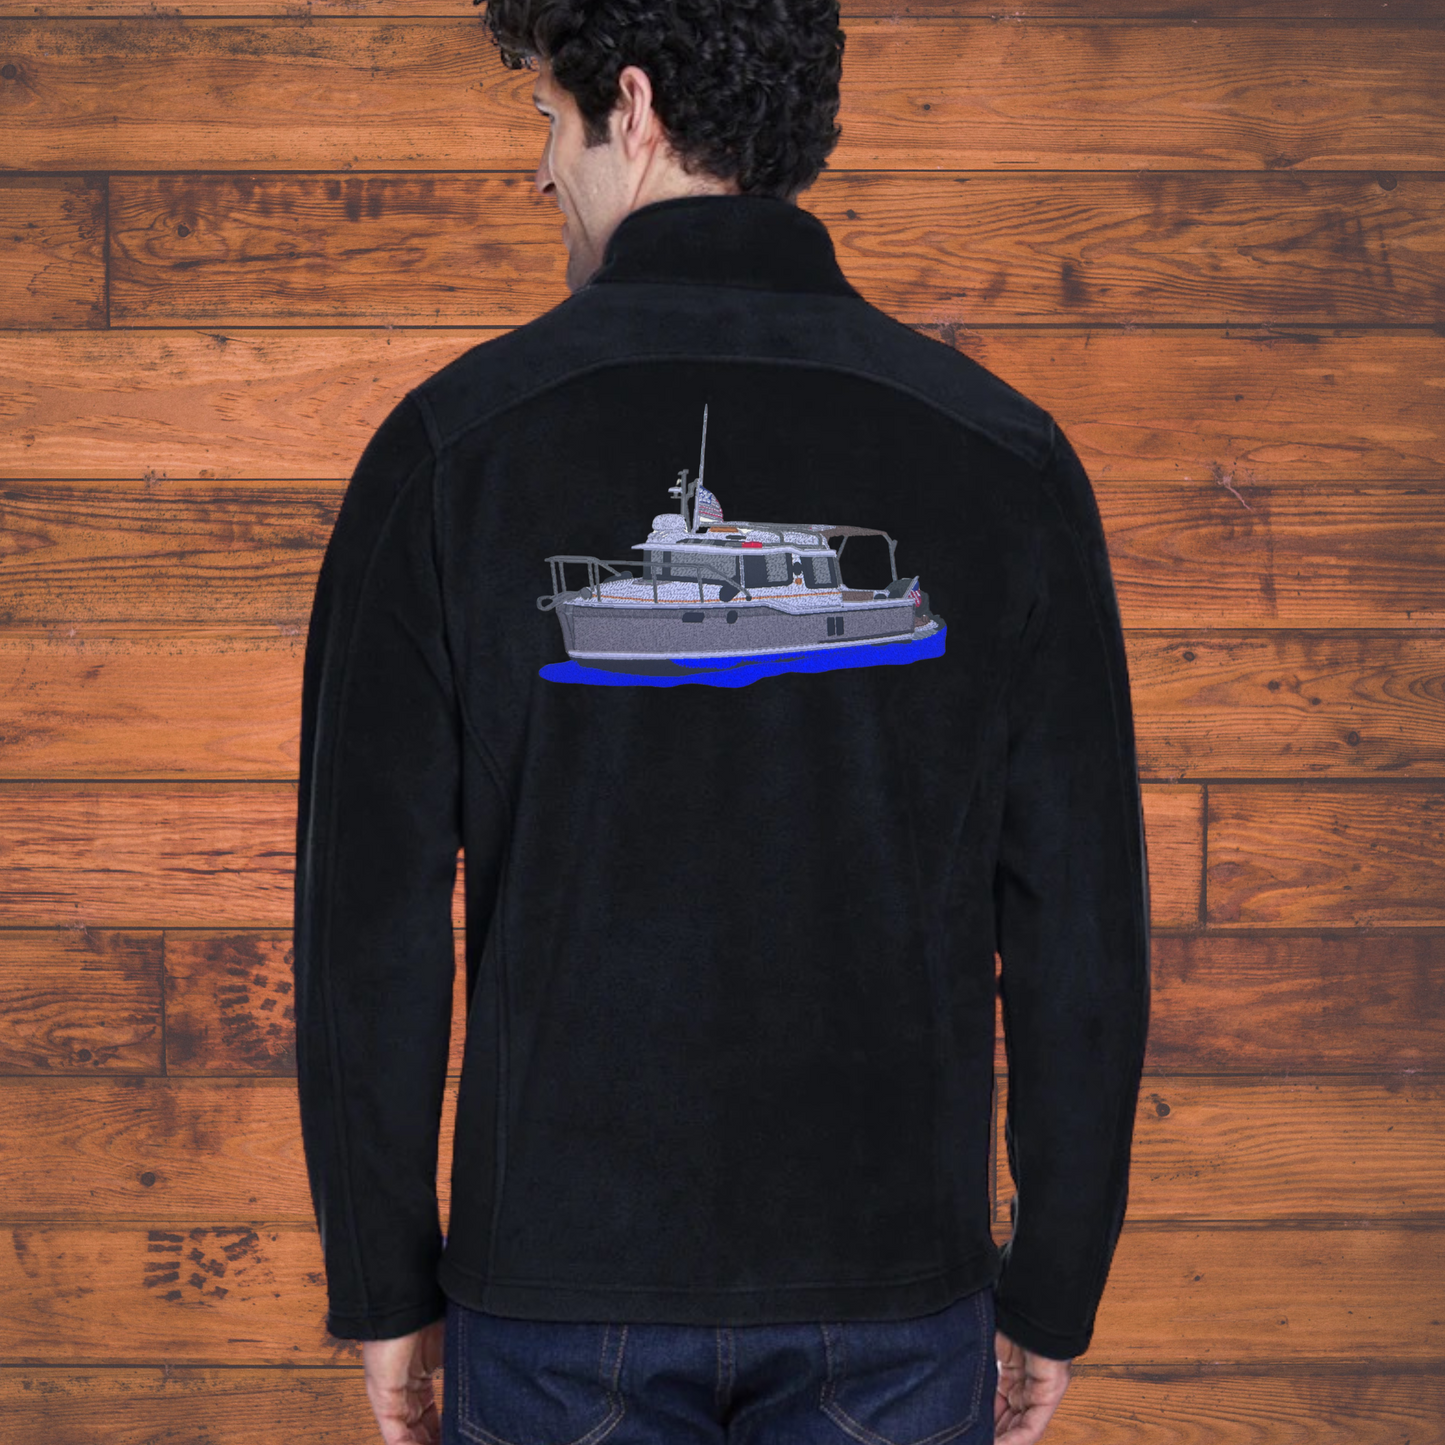 Fleece Jacket with a Ranger Tug R27ob Embroidered on the back Personalized with Boat name on the Front. Zip up